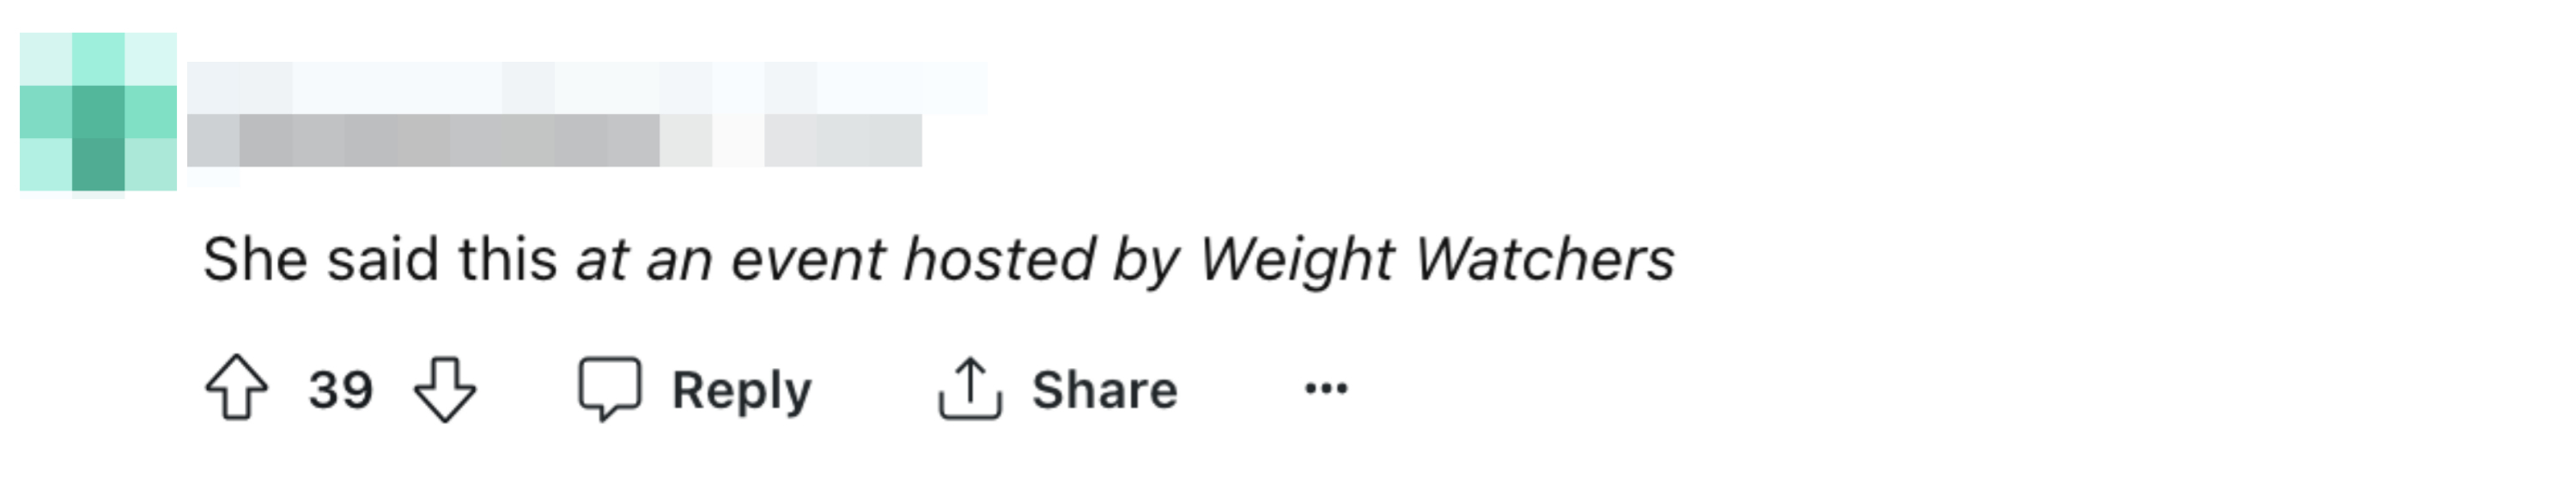 Comment on social media platform: User mentioning an event hosted by Weight Watchers